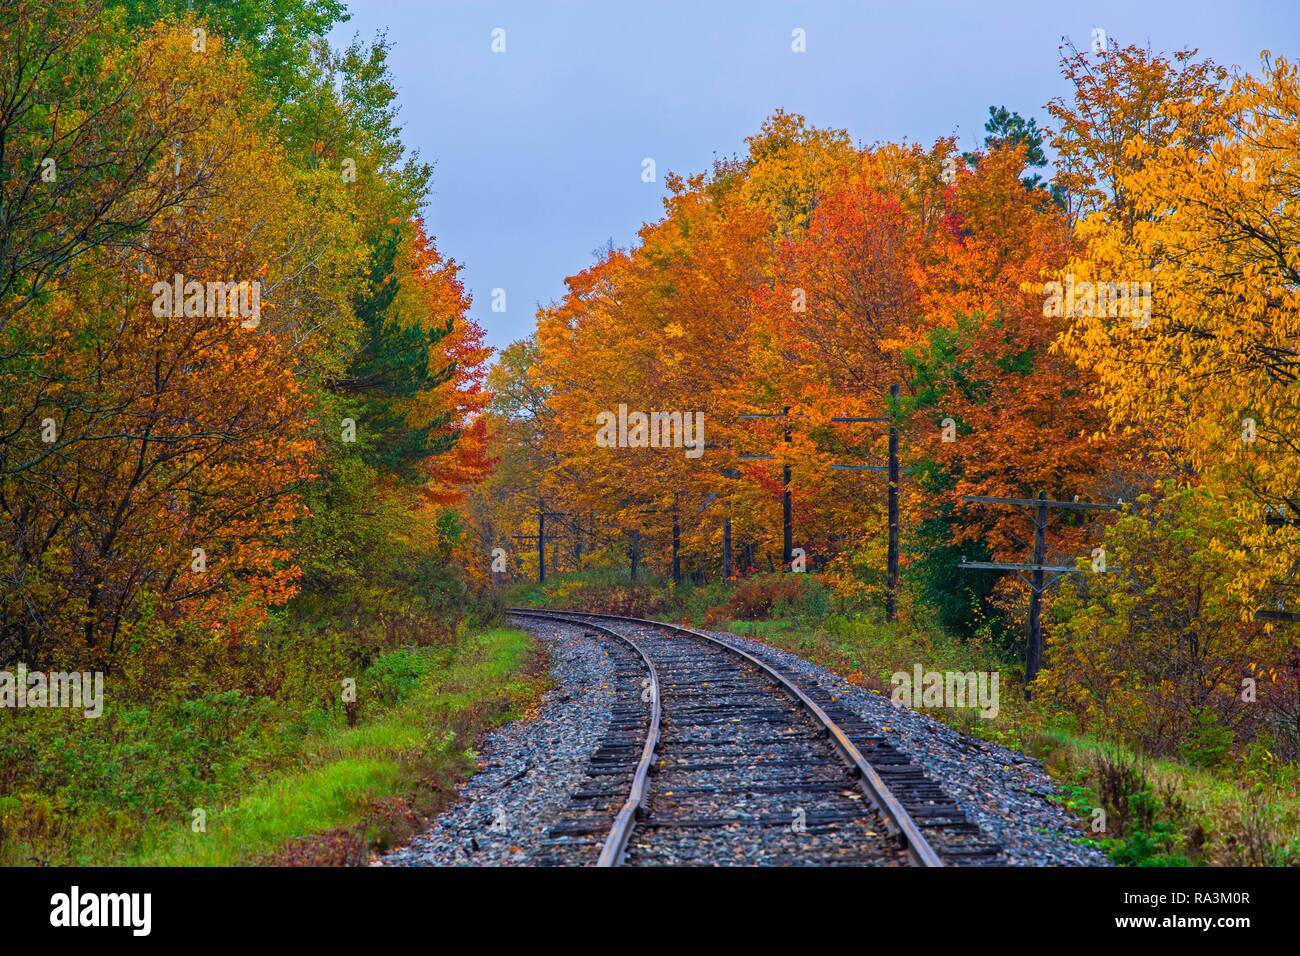 Railway tracks with colorful trees in autumn, Quebec, Canada Stock Photo